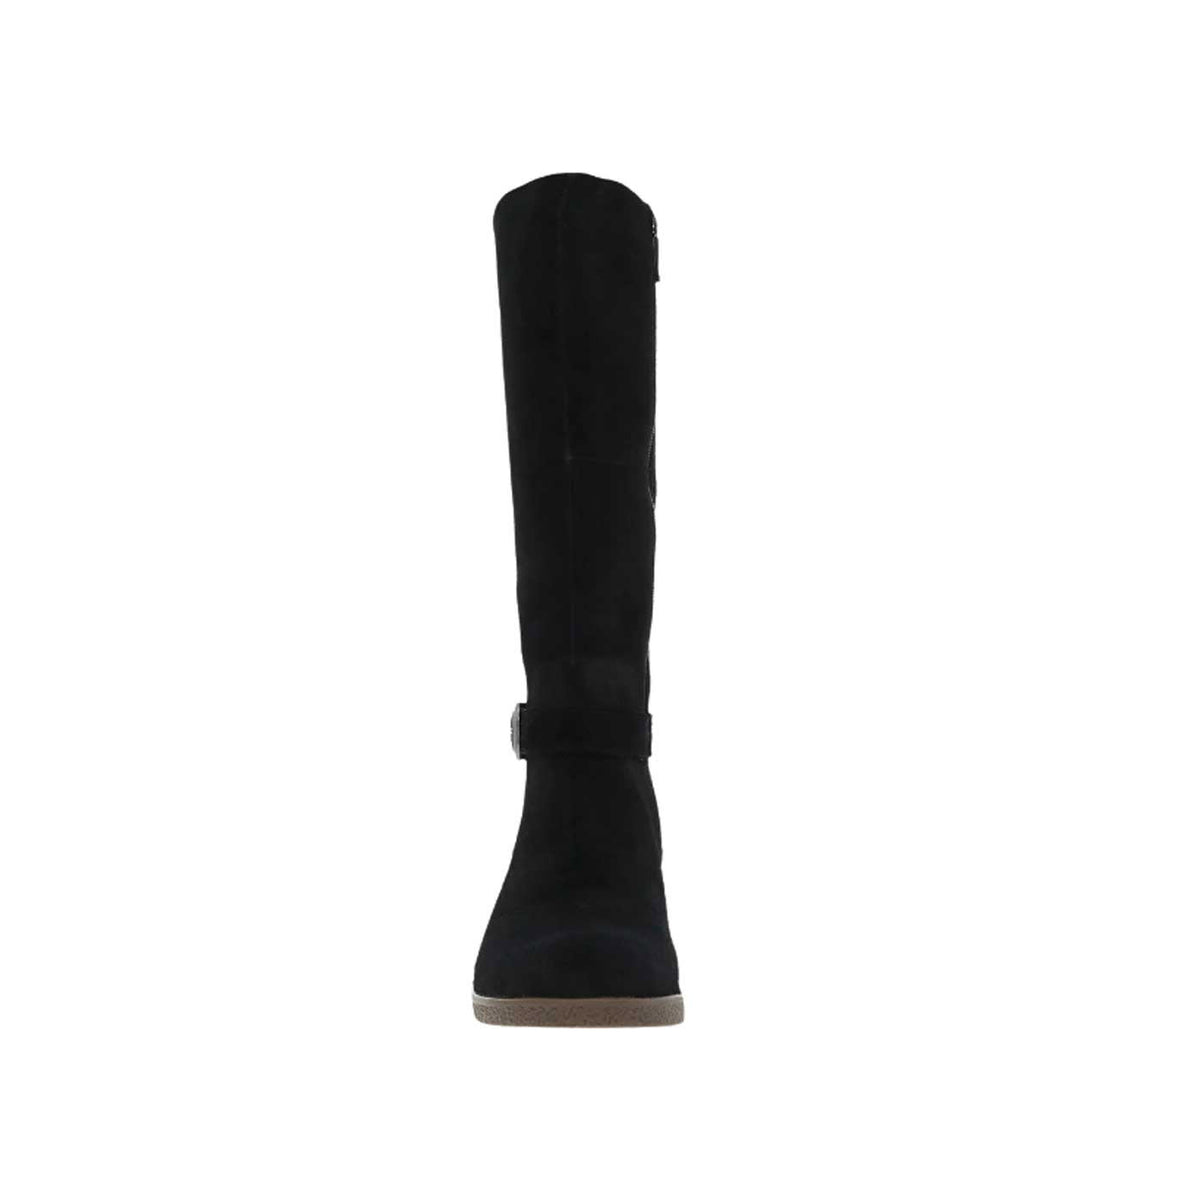 A Dansko Dalinda black suede knee-high boot displayed against a white background, viewed from the side, featuring waterproof leathers.